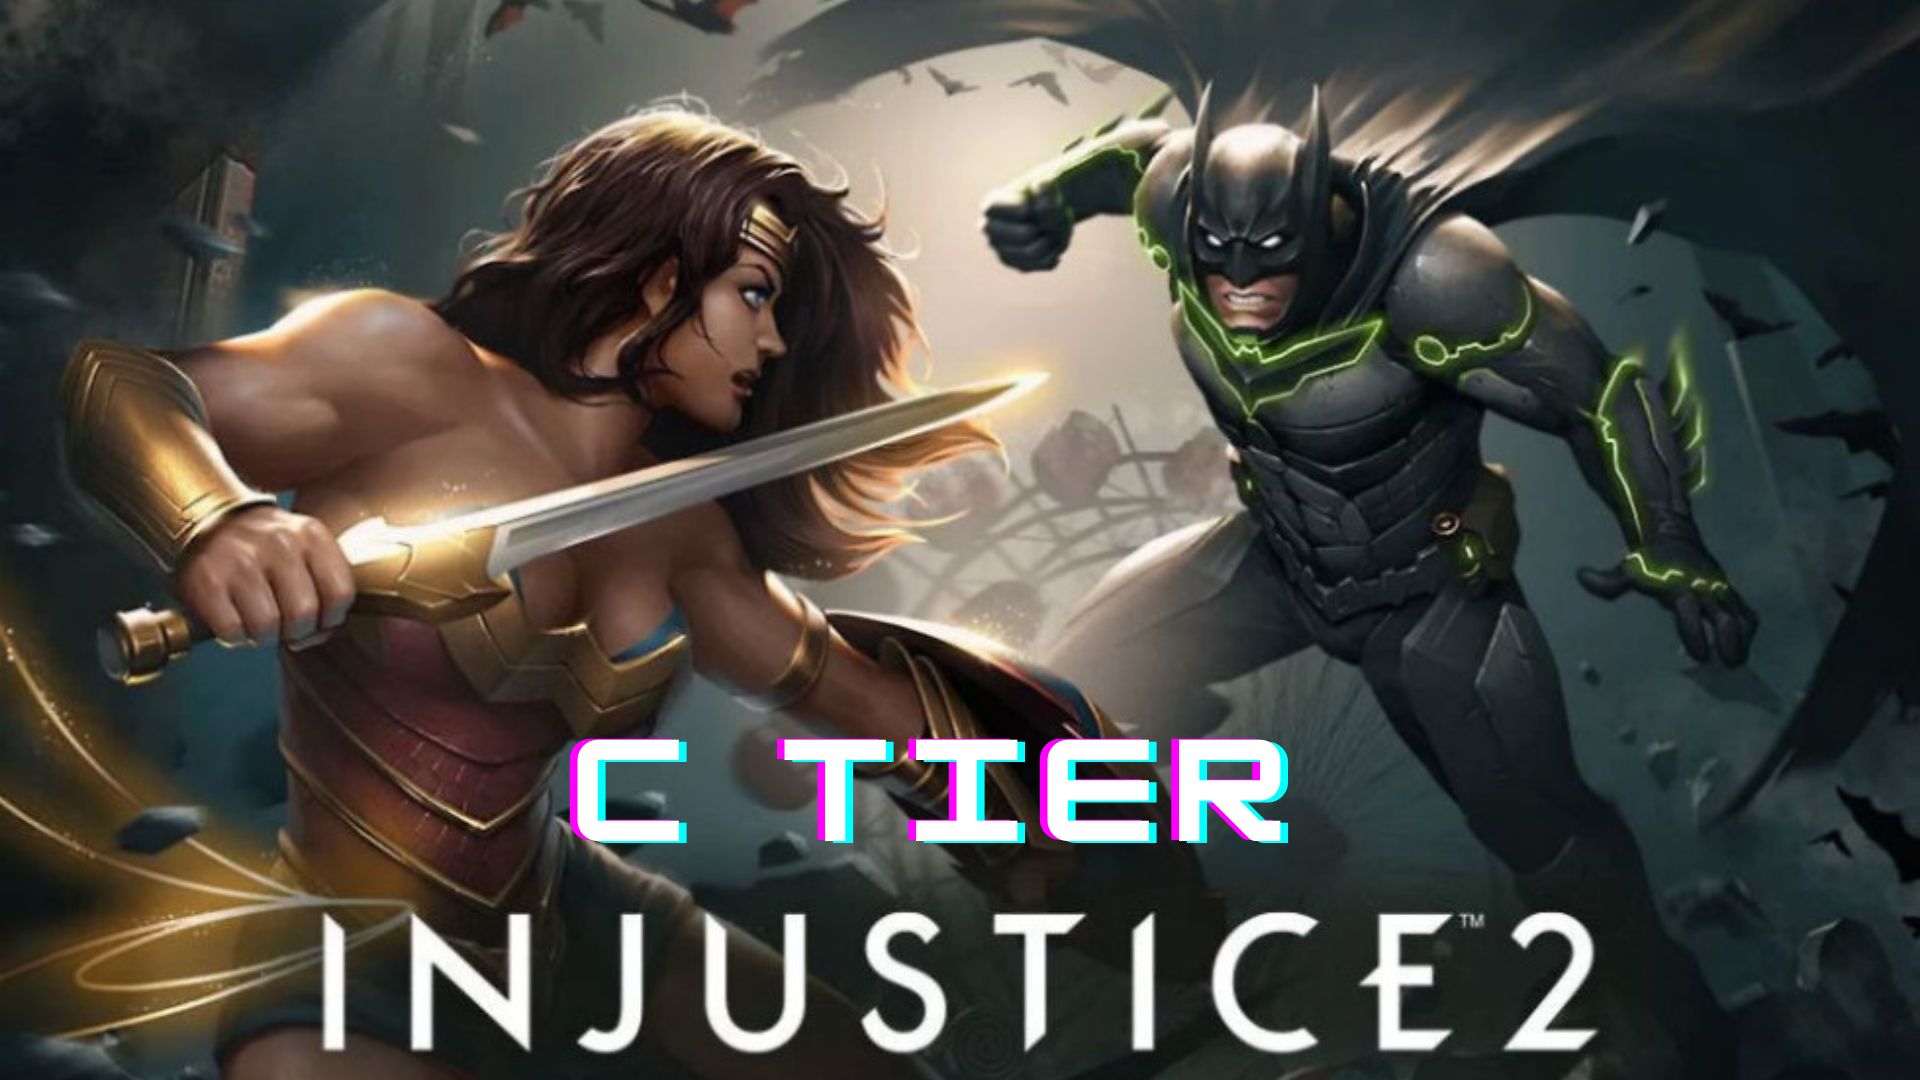 Bad characters of injustice 2